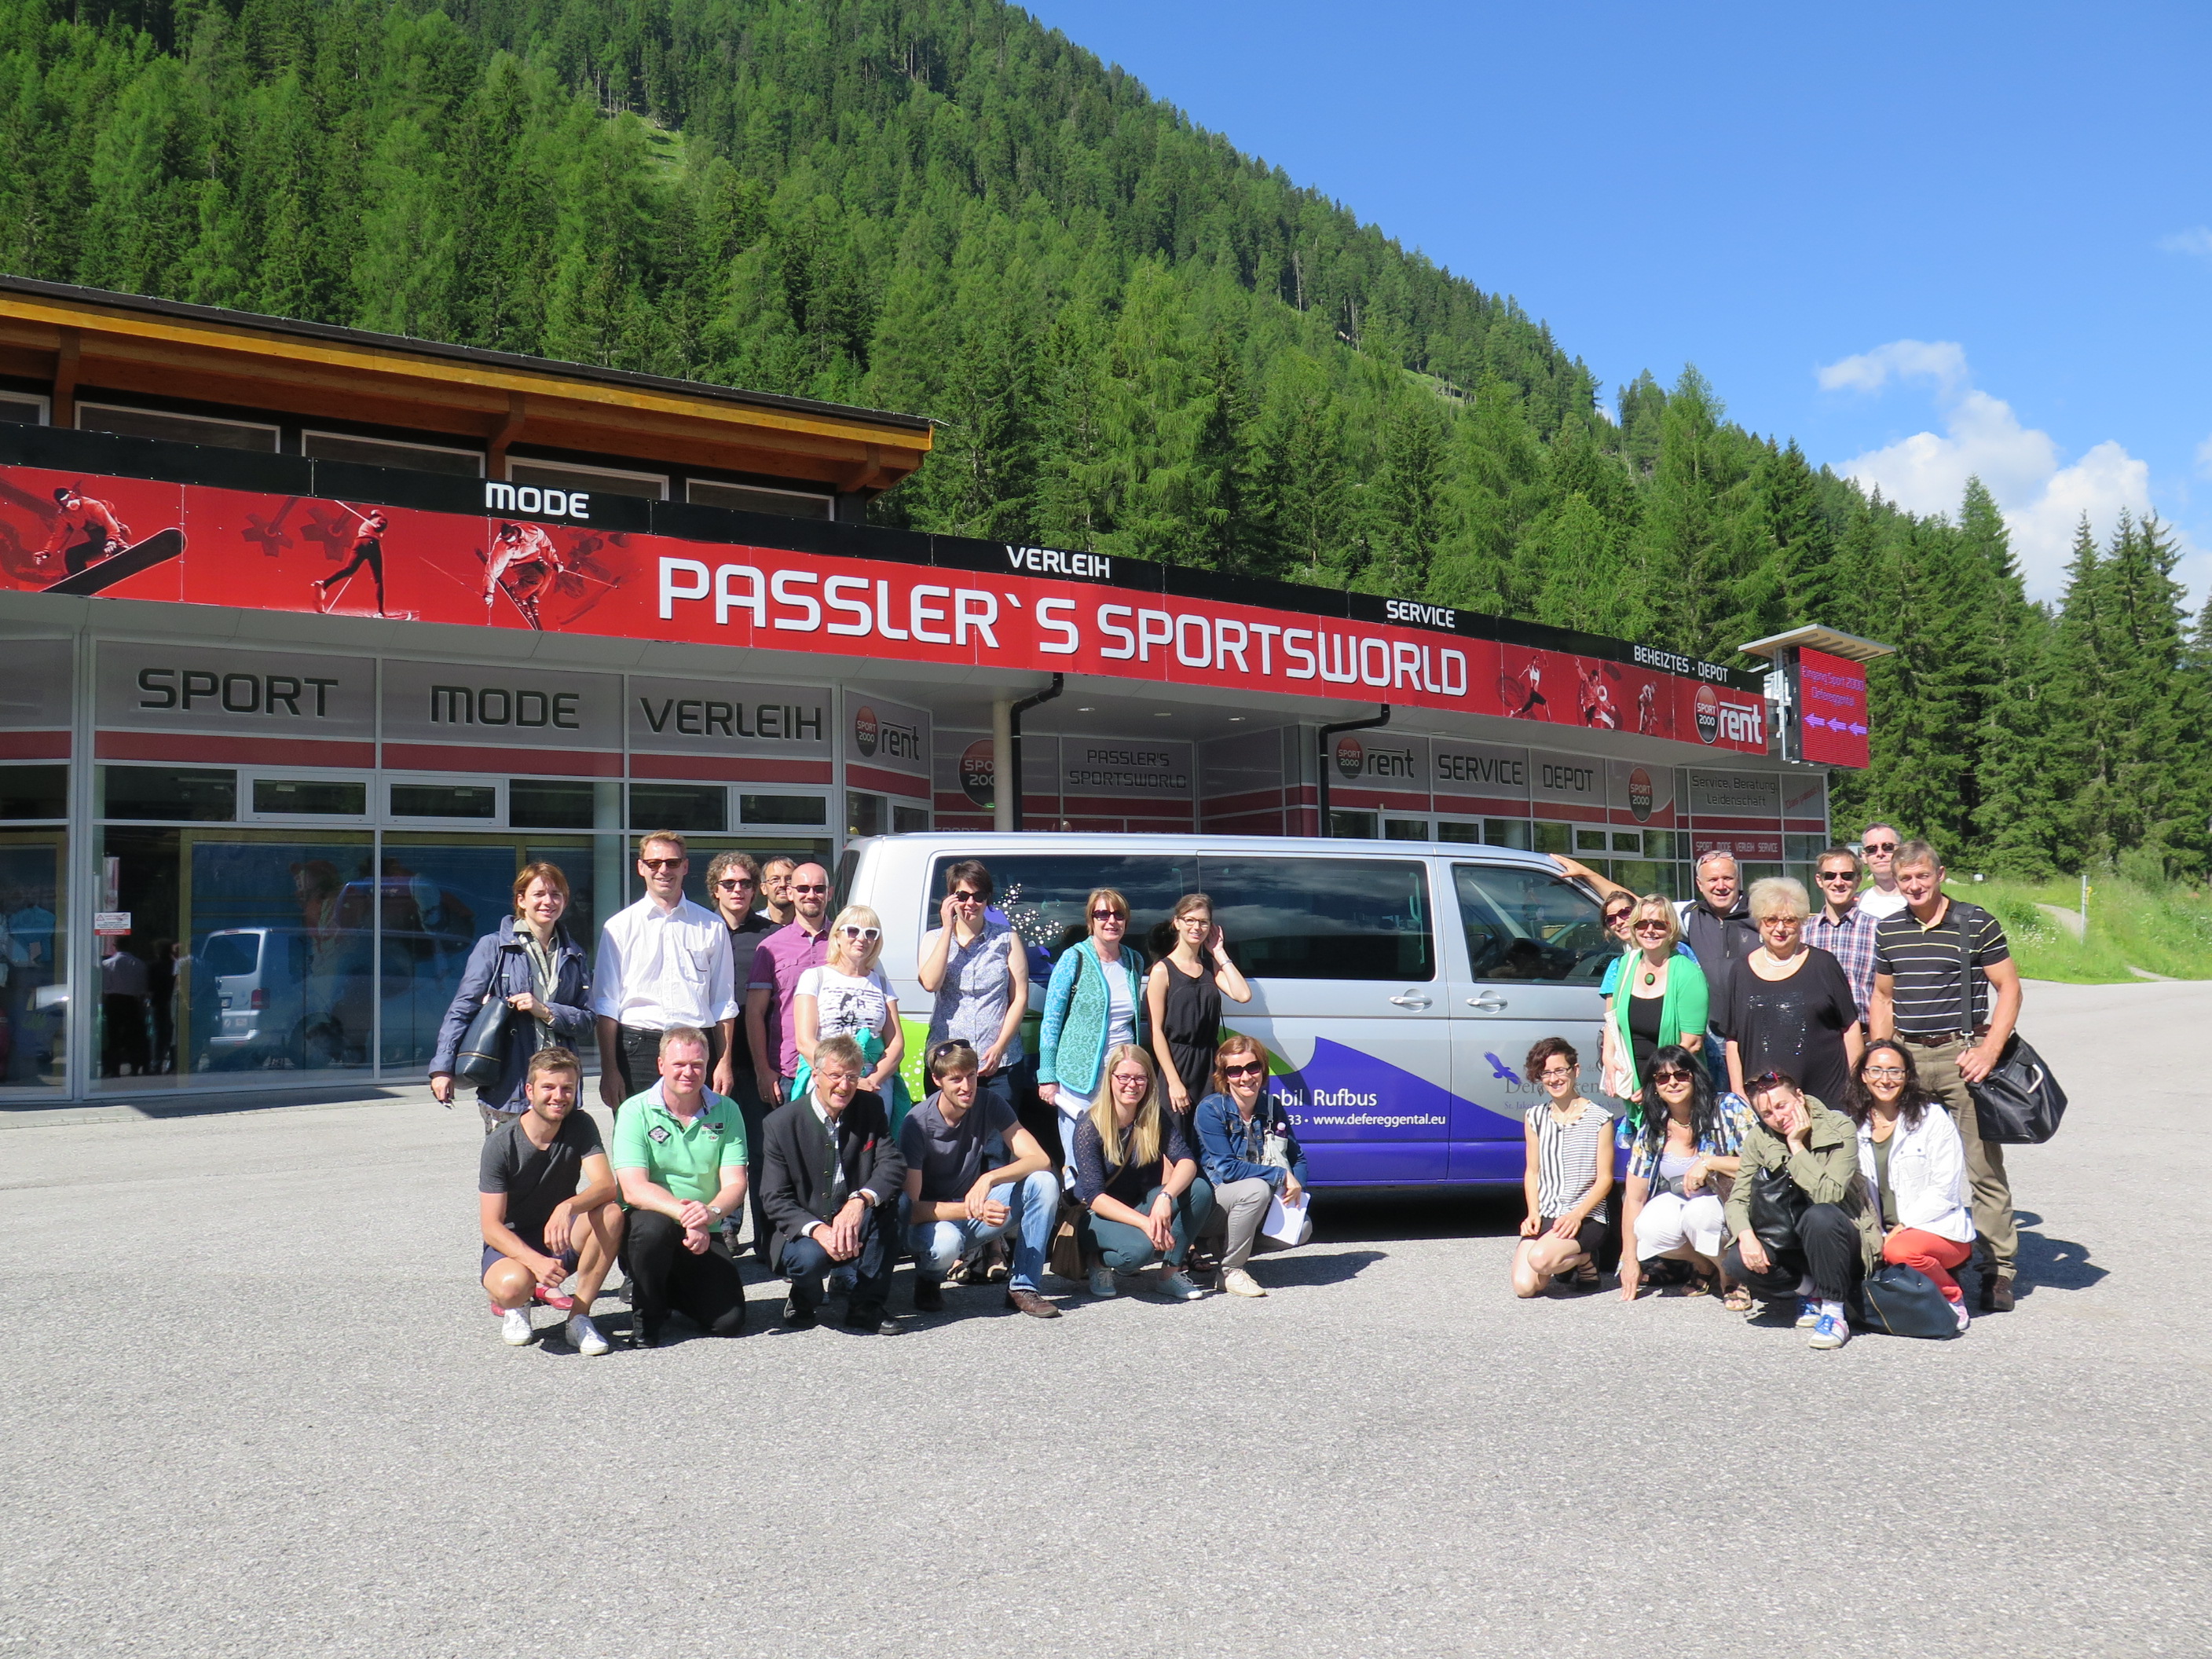 Exchange meeting and study tour 28-30 June in Lienz